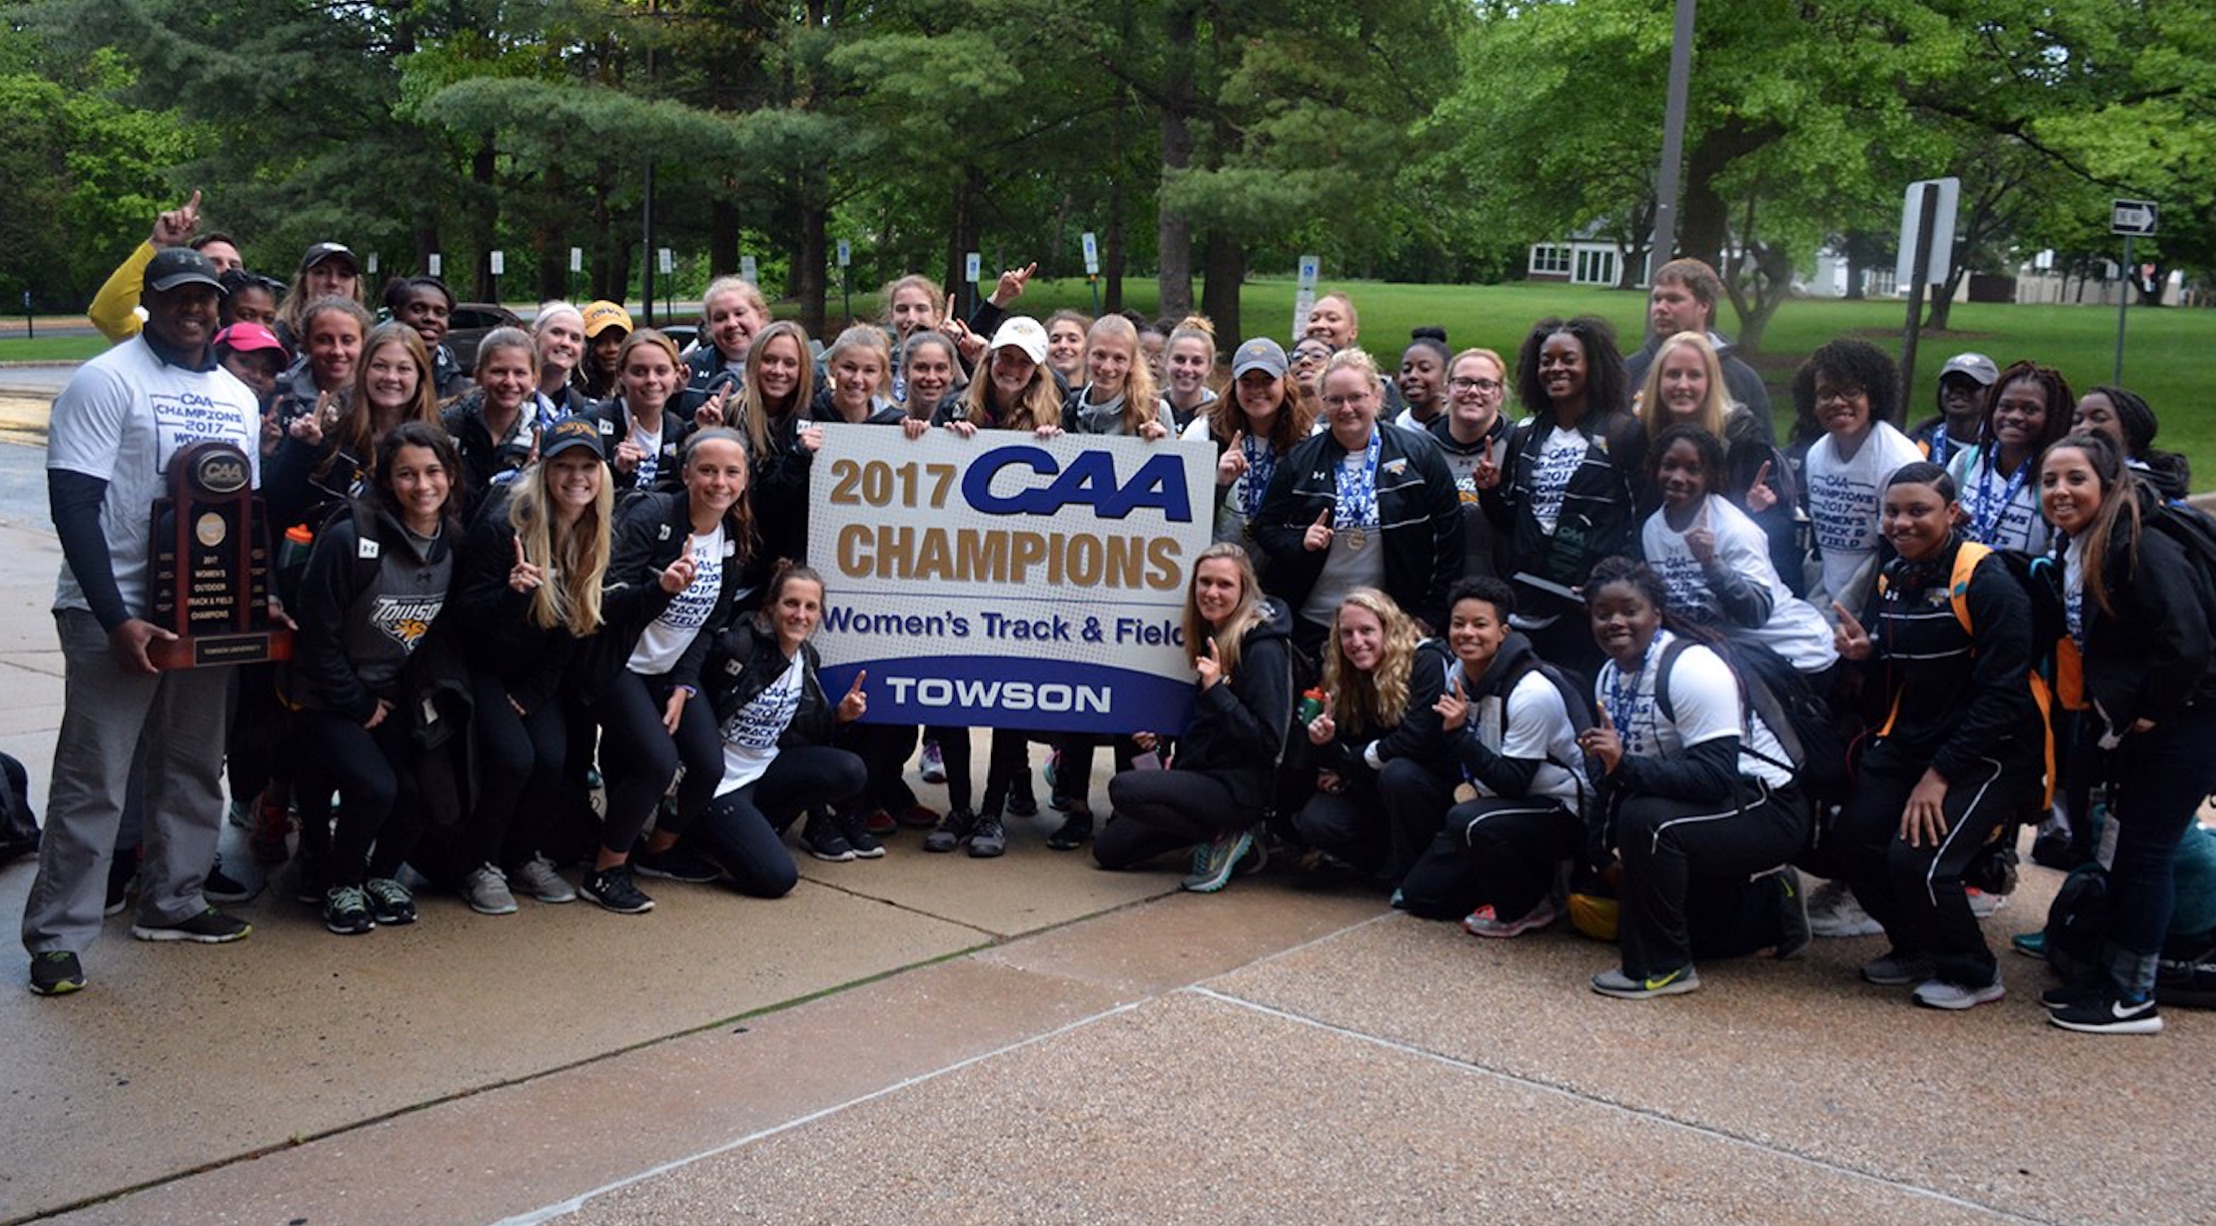 The Towson women's track and field team poses with the trophy after the team captured its first Colonial Athletic Association (CAA) Outdoor Track & Field Championship on Saturday afternoon.